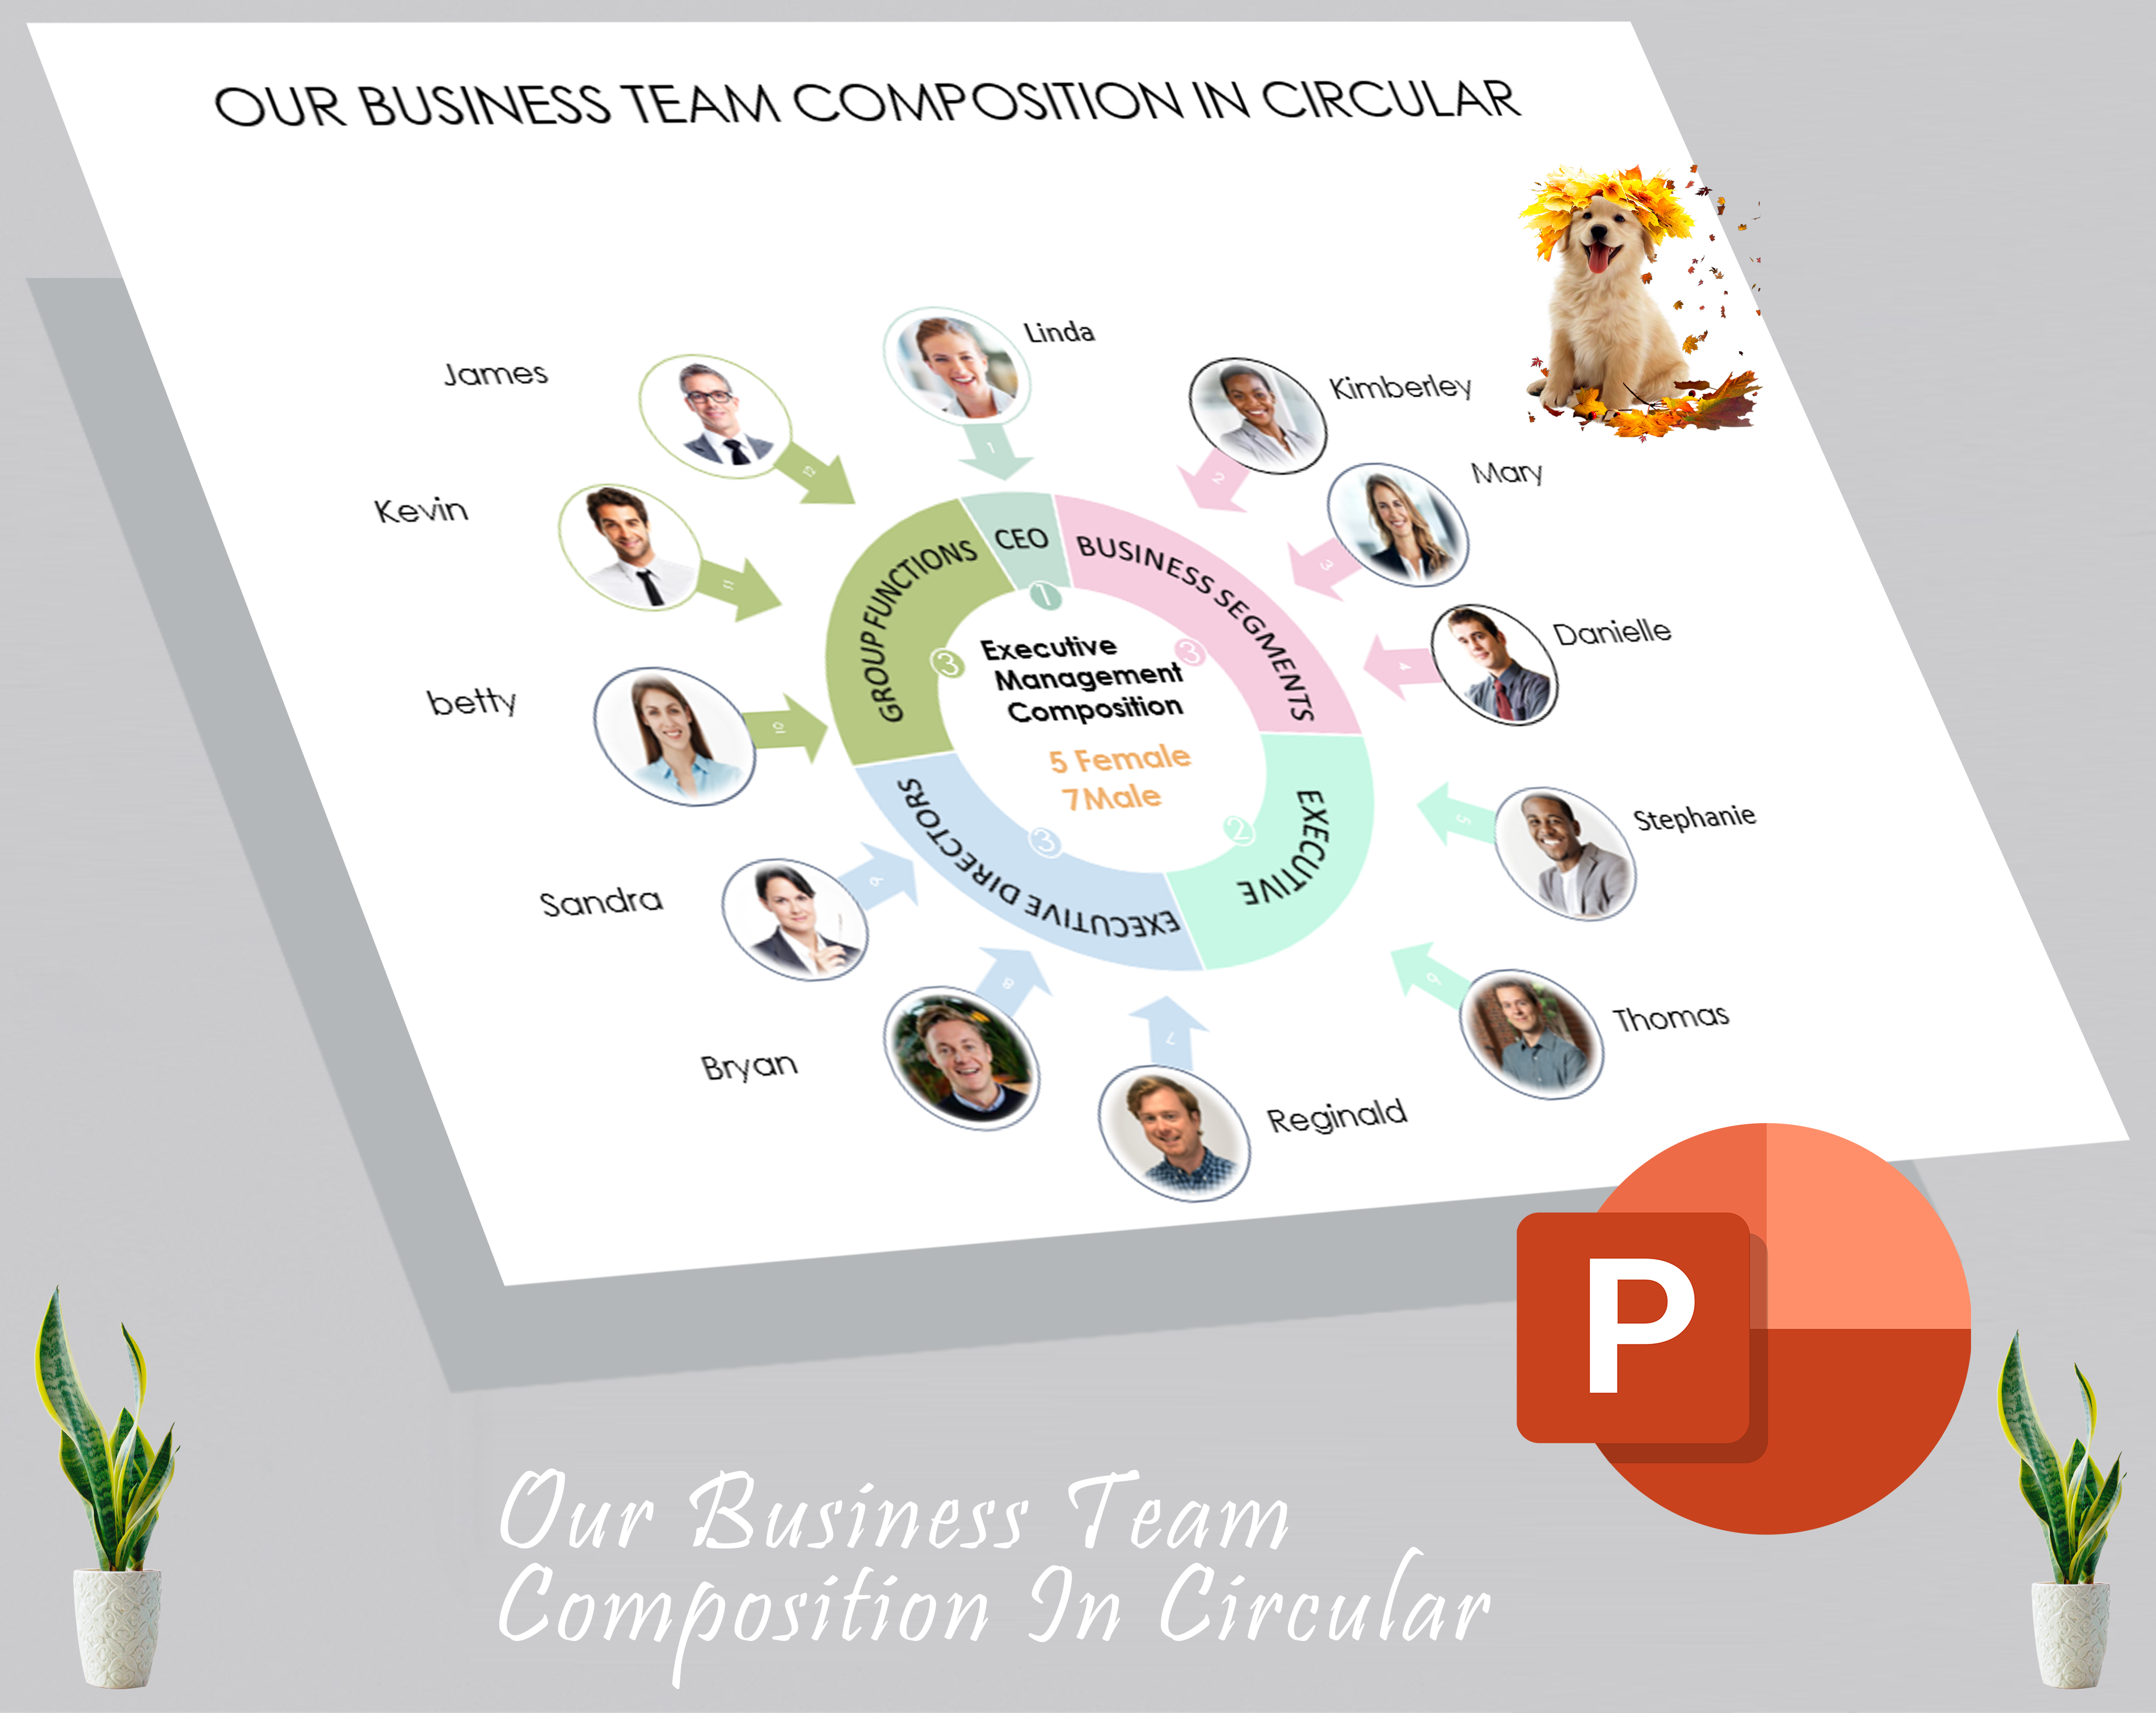 Our Business Team Composition In circular